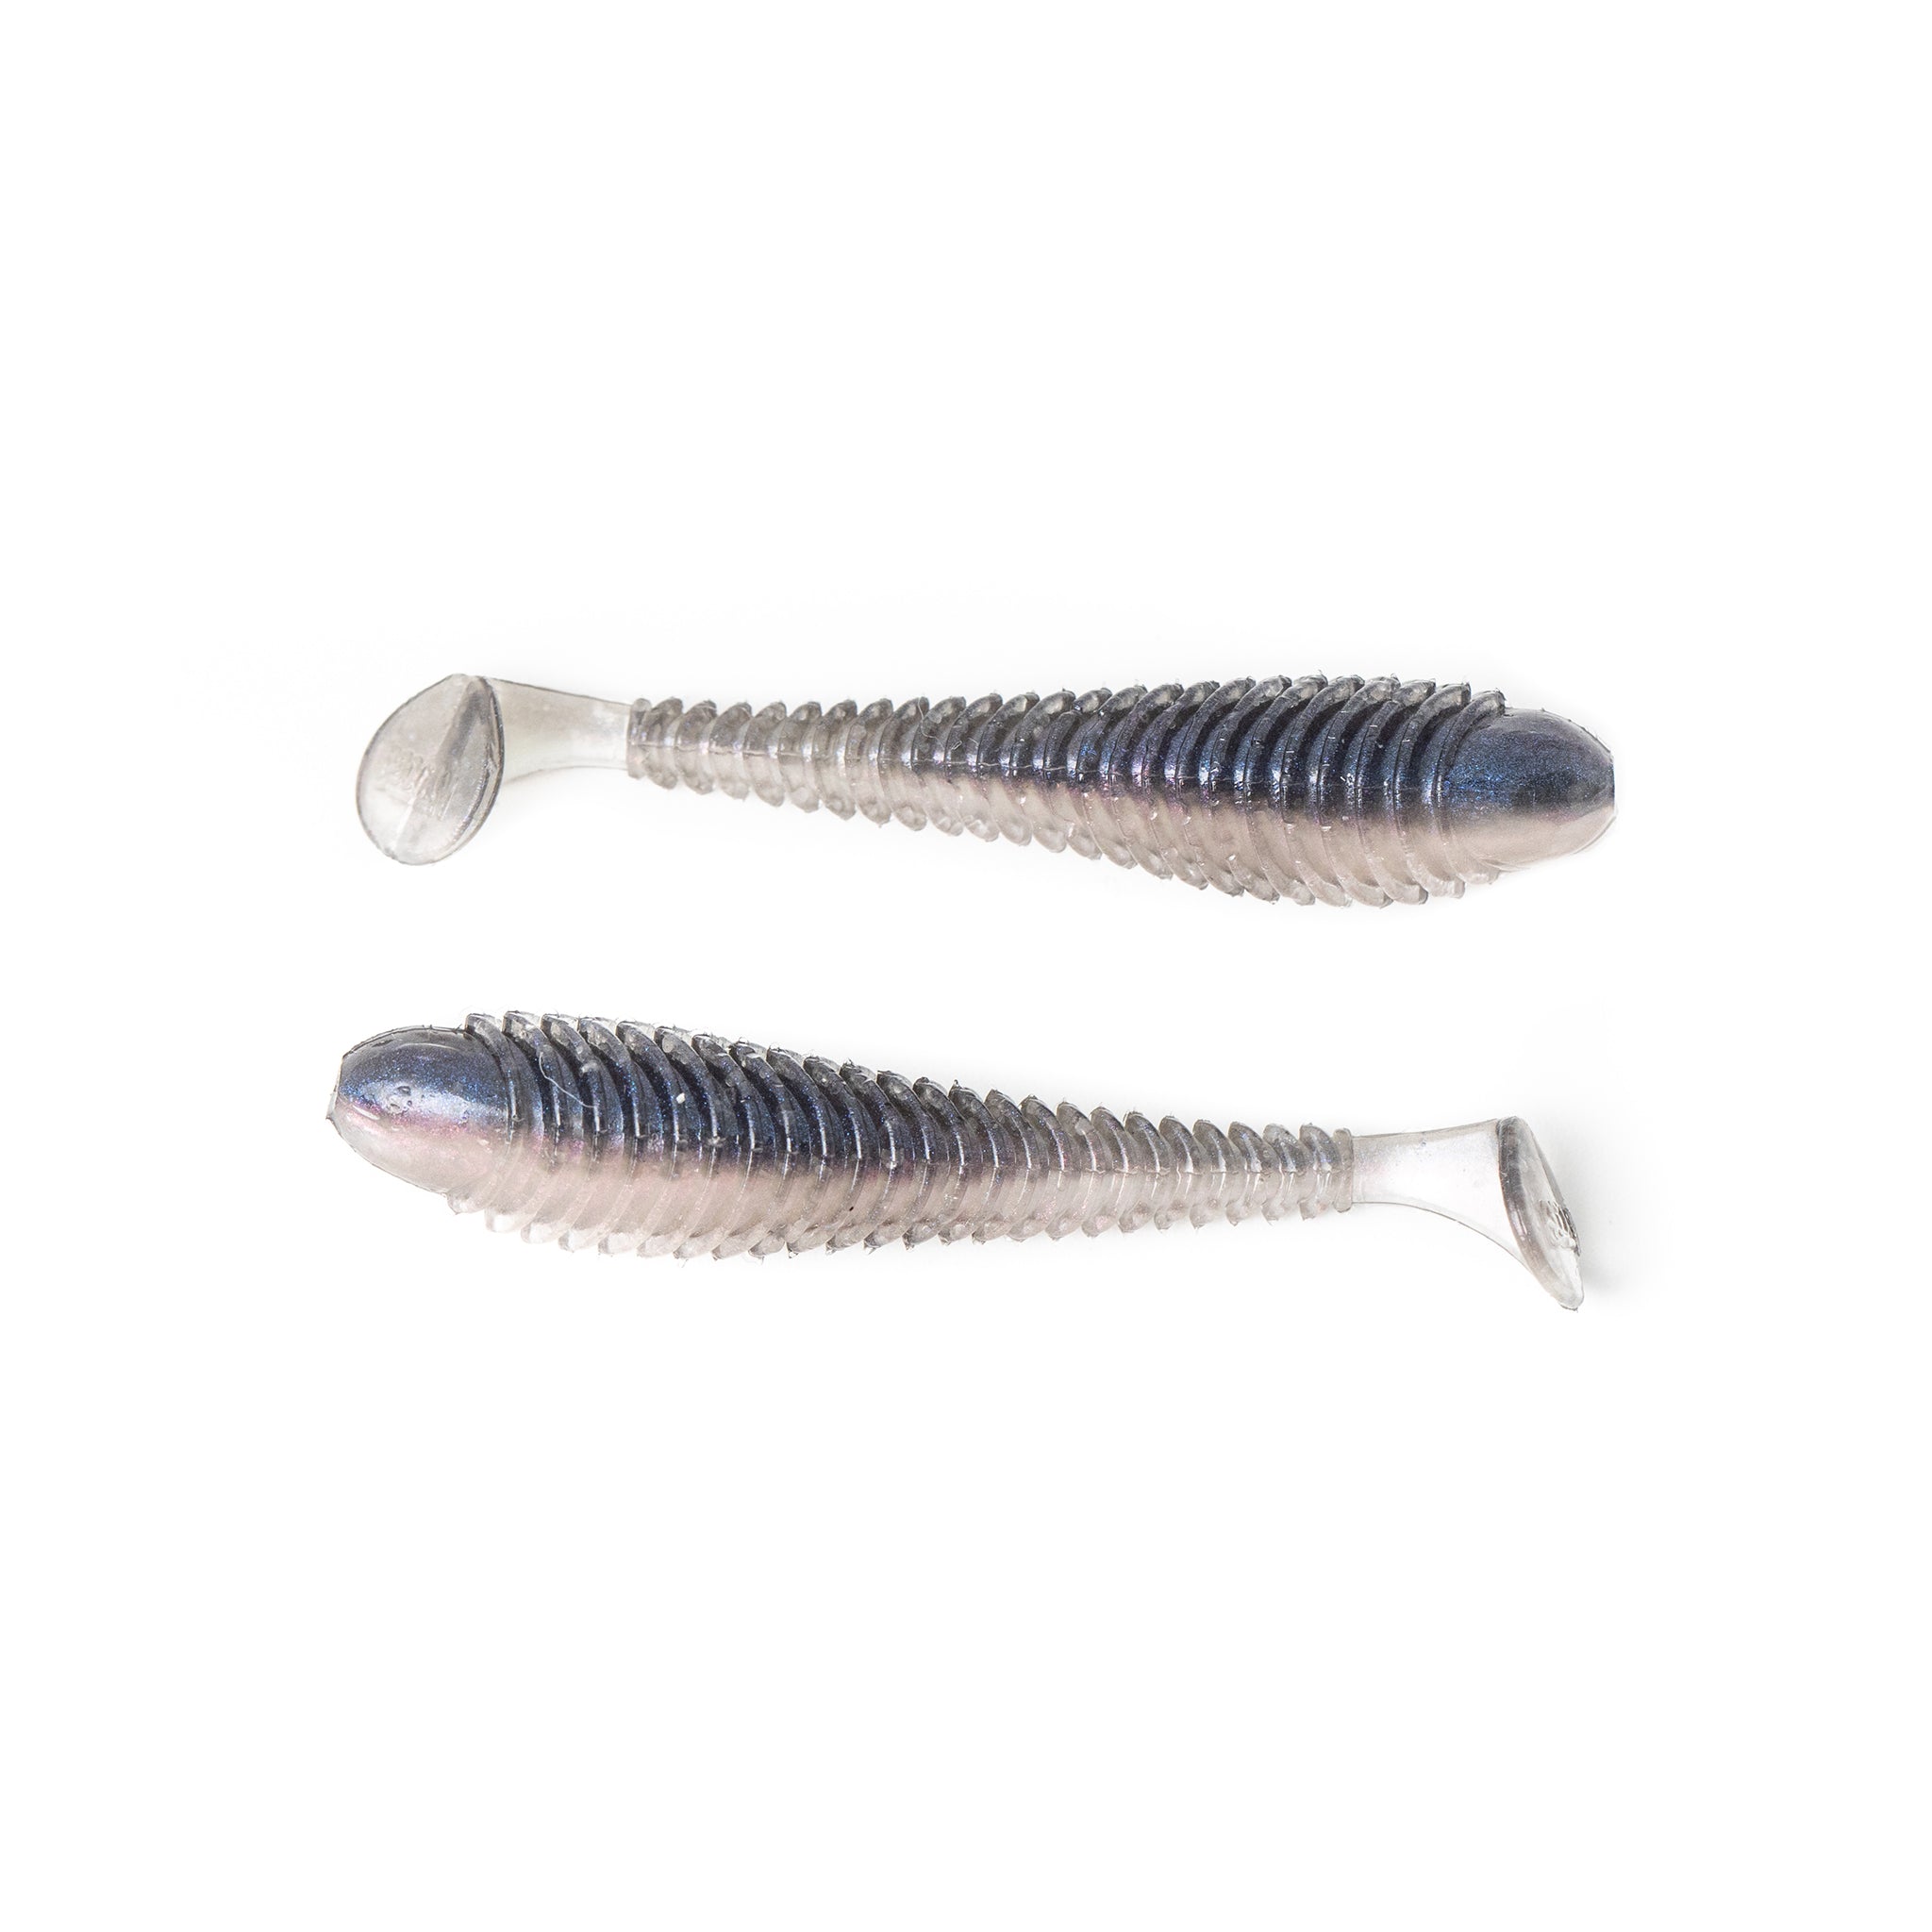 Googan Baits Saucy Swimmer Paddle Tail Shad 3.3, 3.8, And 4.8 inch